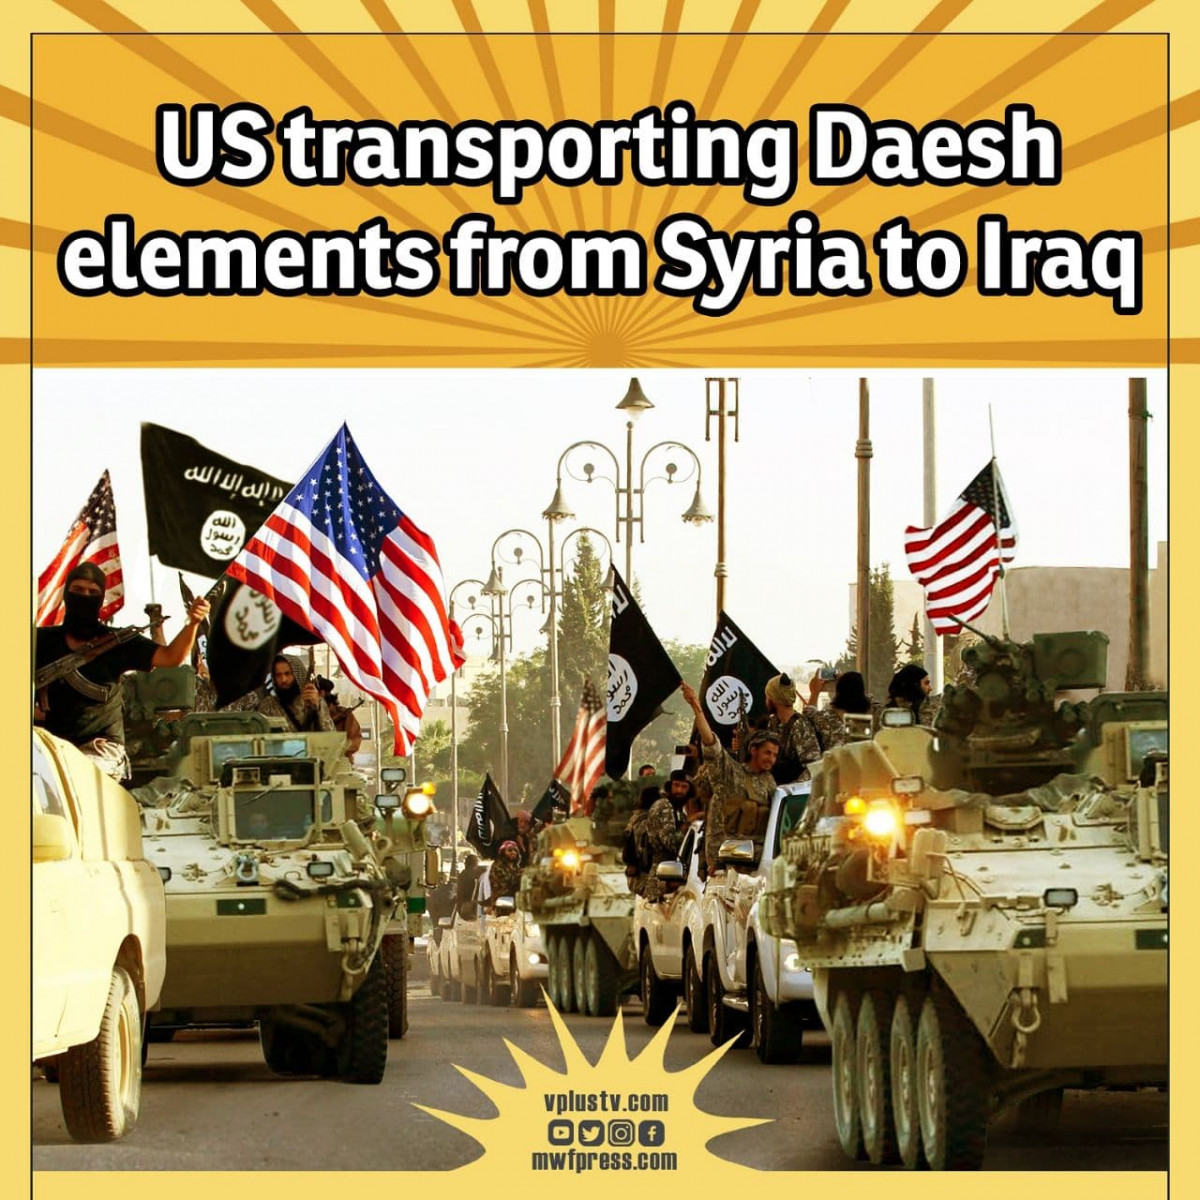 US transporting Daesh elements from Syria to Iraq